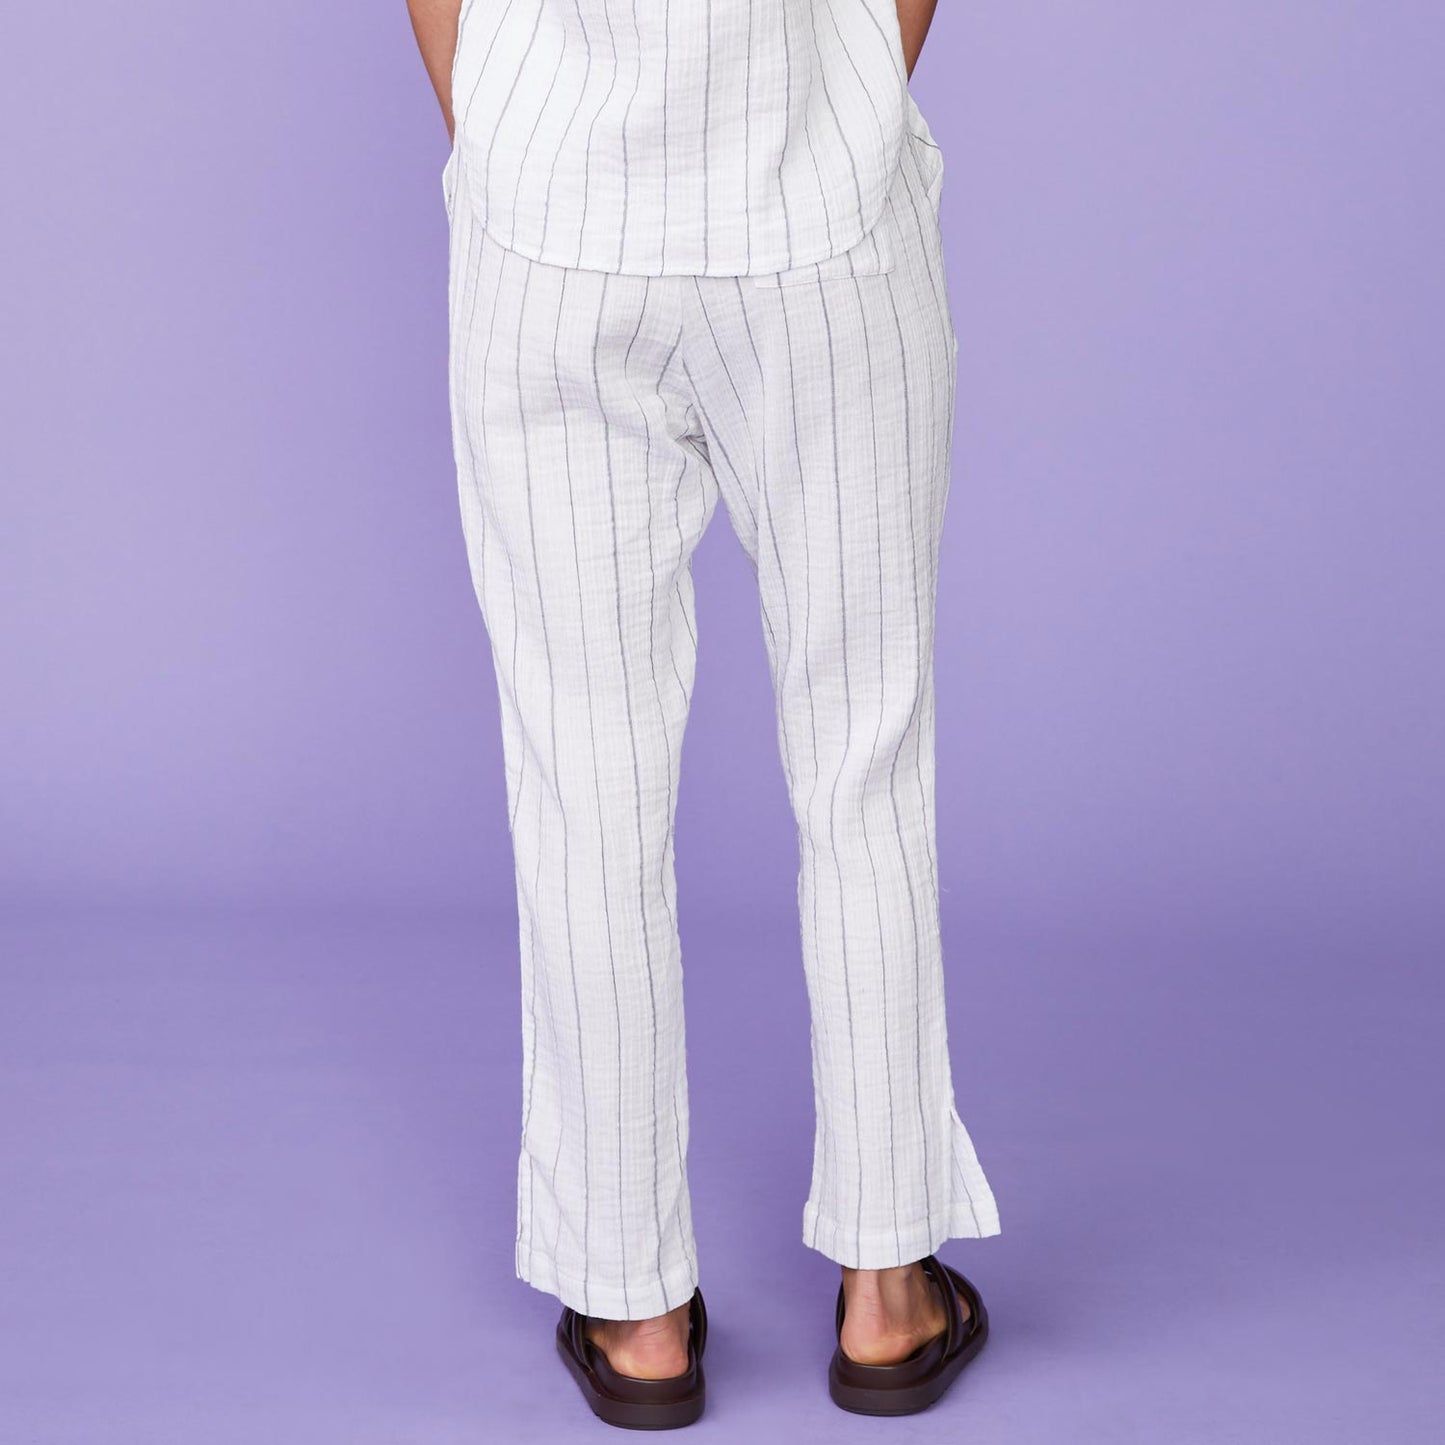 Back View of model wearing the Pinstripe Gauze Pants in White